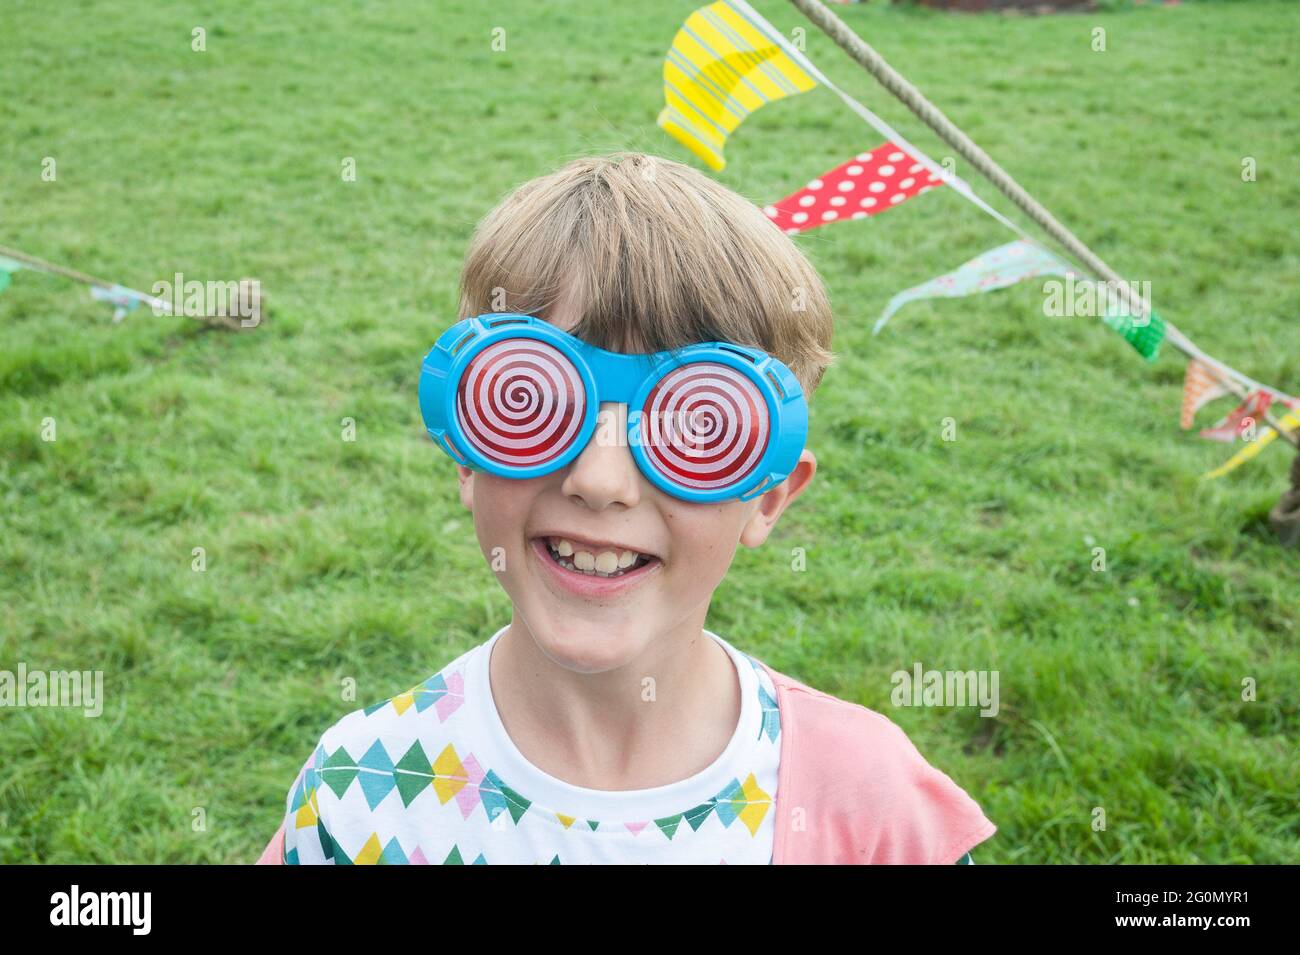 A young boy in festival costume wearing neon Stock Photo